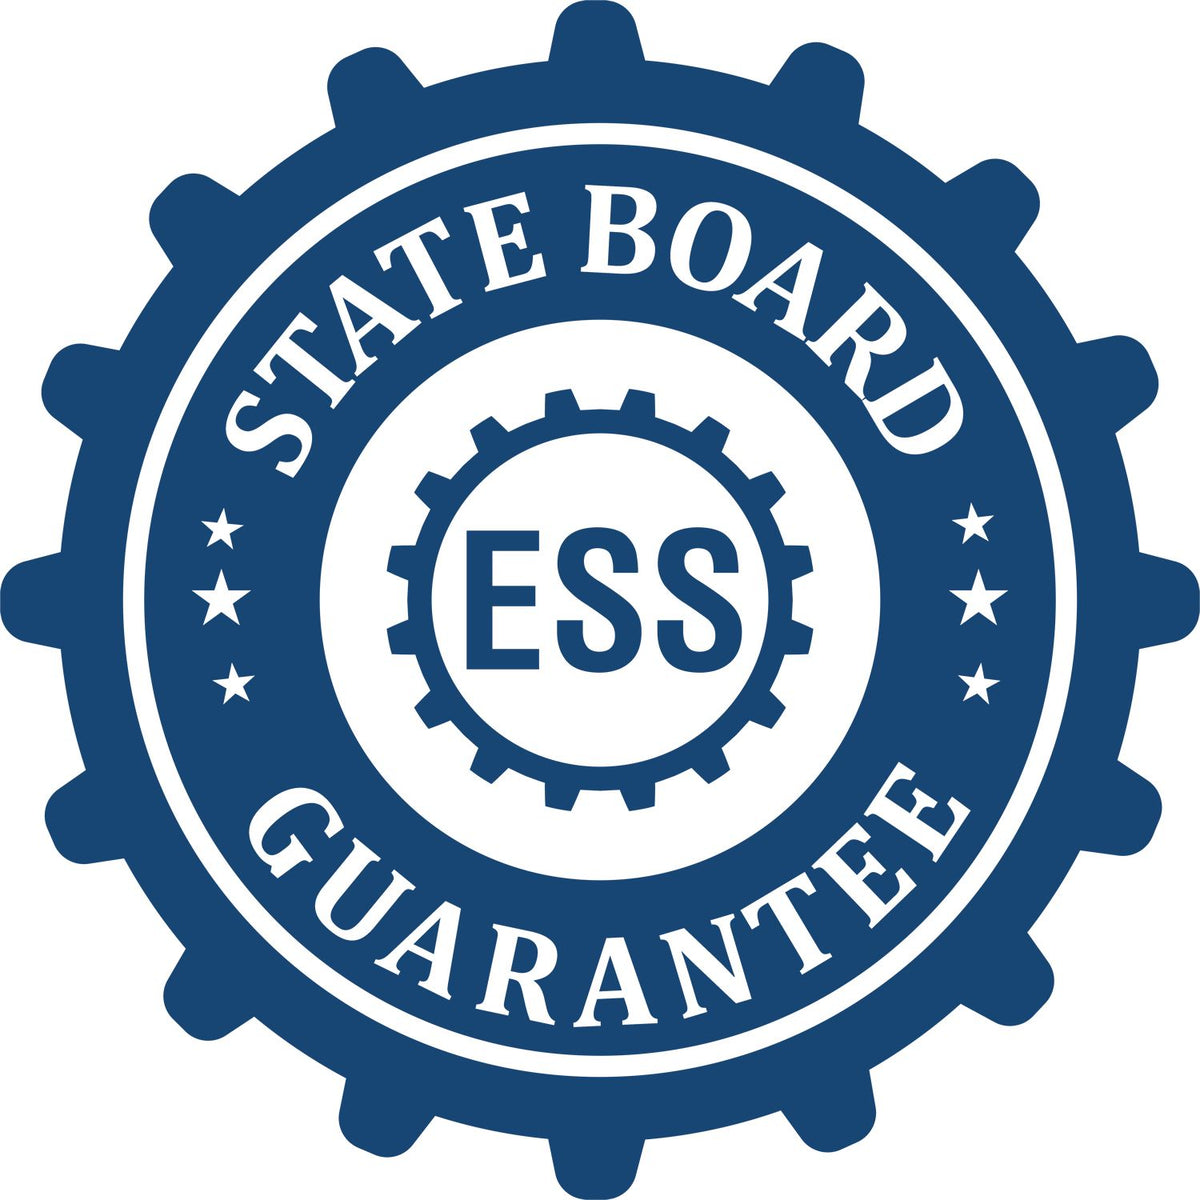 An emblem in a gear shape illustrating a state board guarantee for the Connecticut Geologist Desk Seal